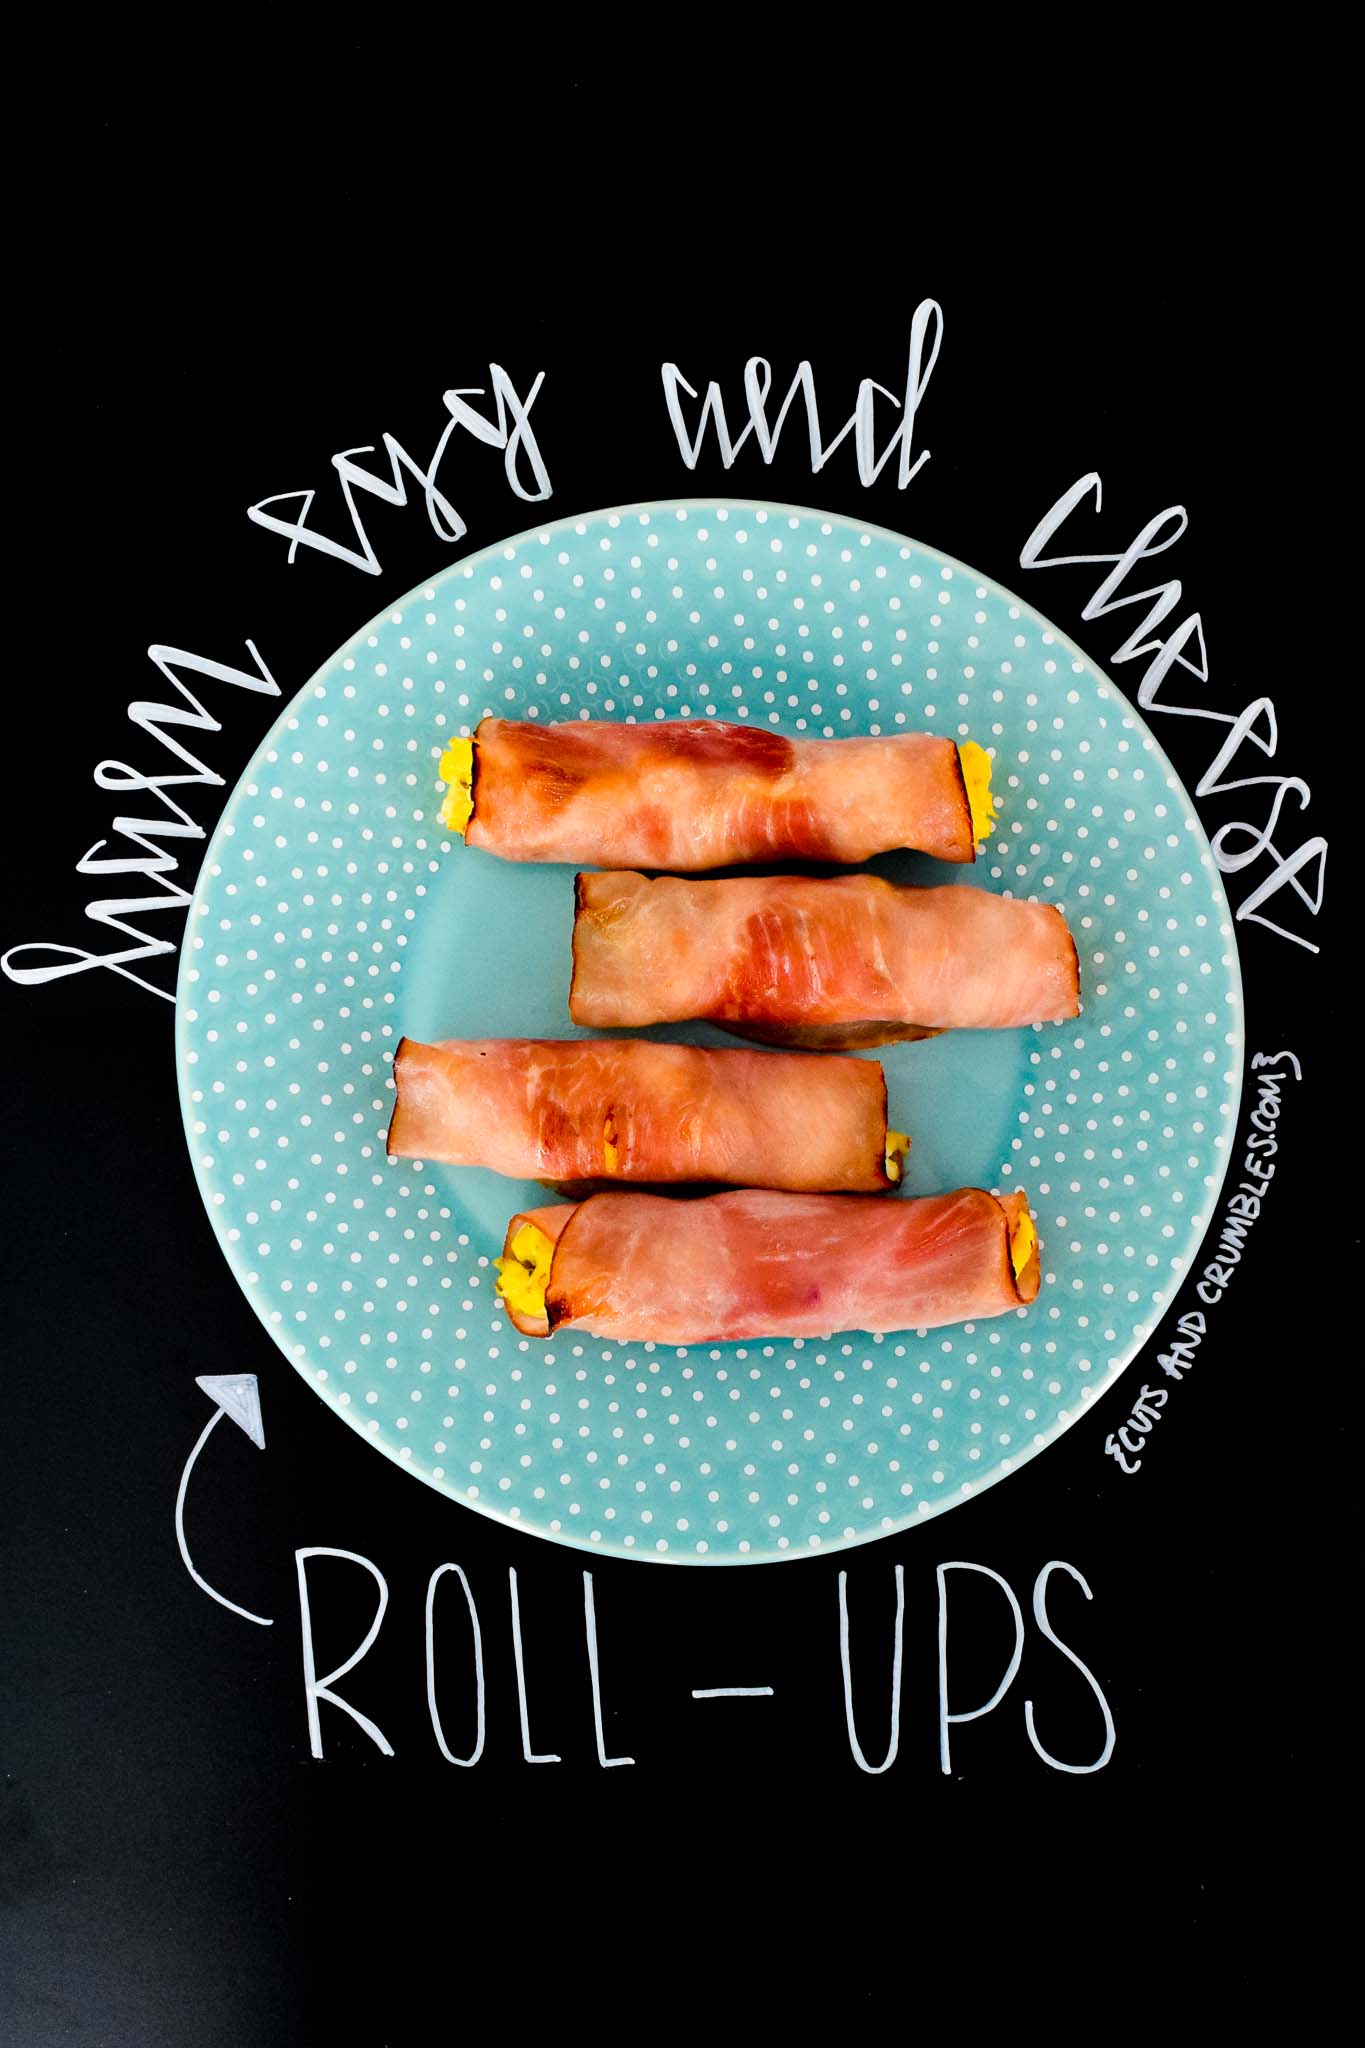 Ham Egg and Cheese Roll-Ups on blue plate with title written on chalkboard